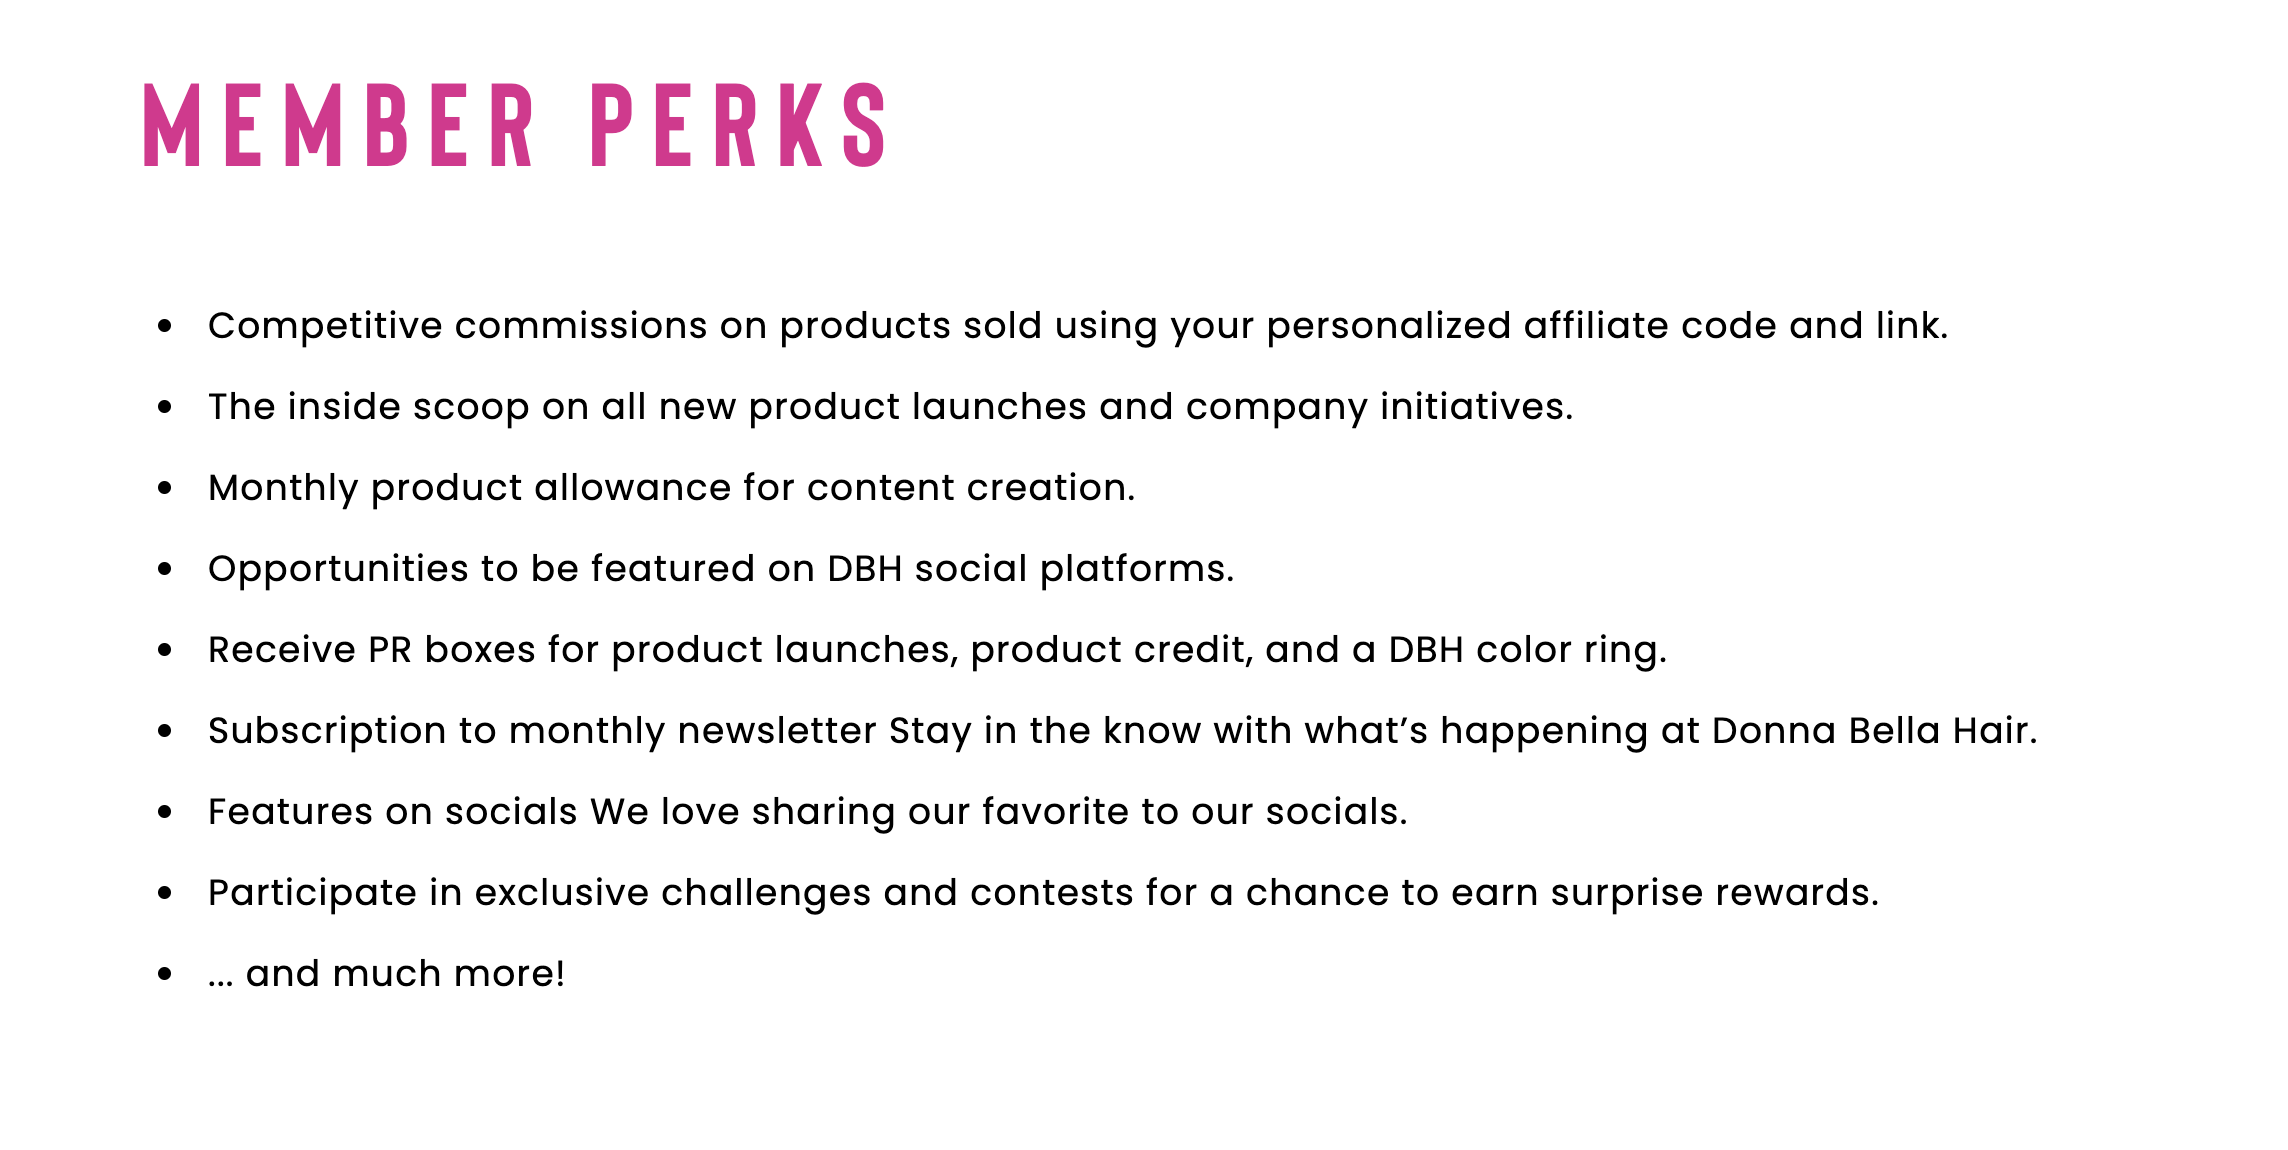 Member Perks for the affiliate creator program:
- Competitive commissions
- Inside scoop on company updates
- Product seeding for content creation
- Opportunities to be featured
- Receive PR boxes
- Subscription to monthly newsletter
- Features on socials
- Exclusive challenges and contests